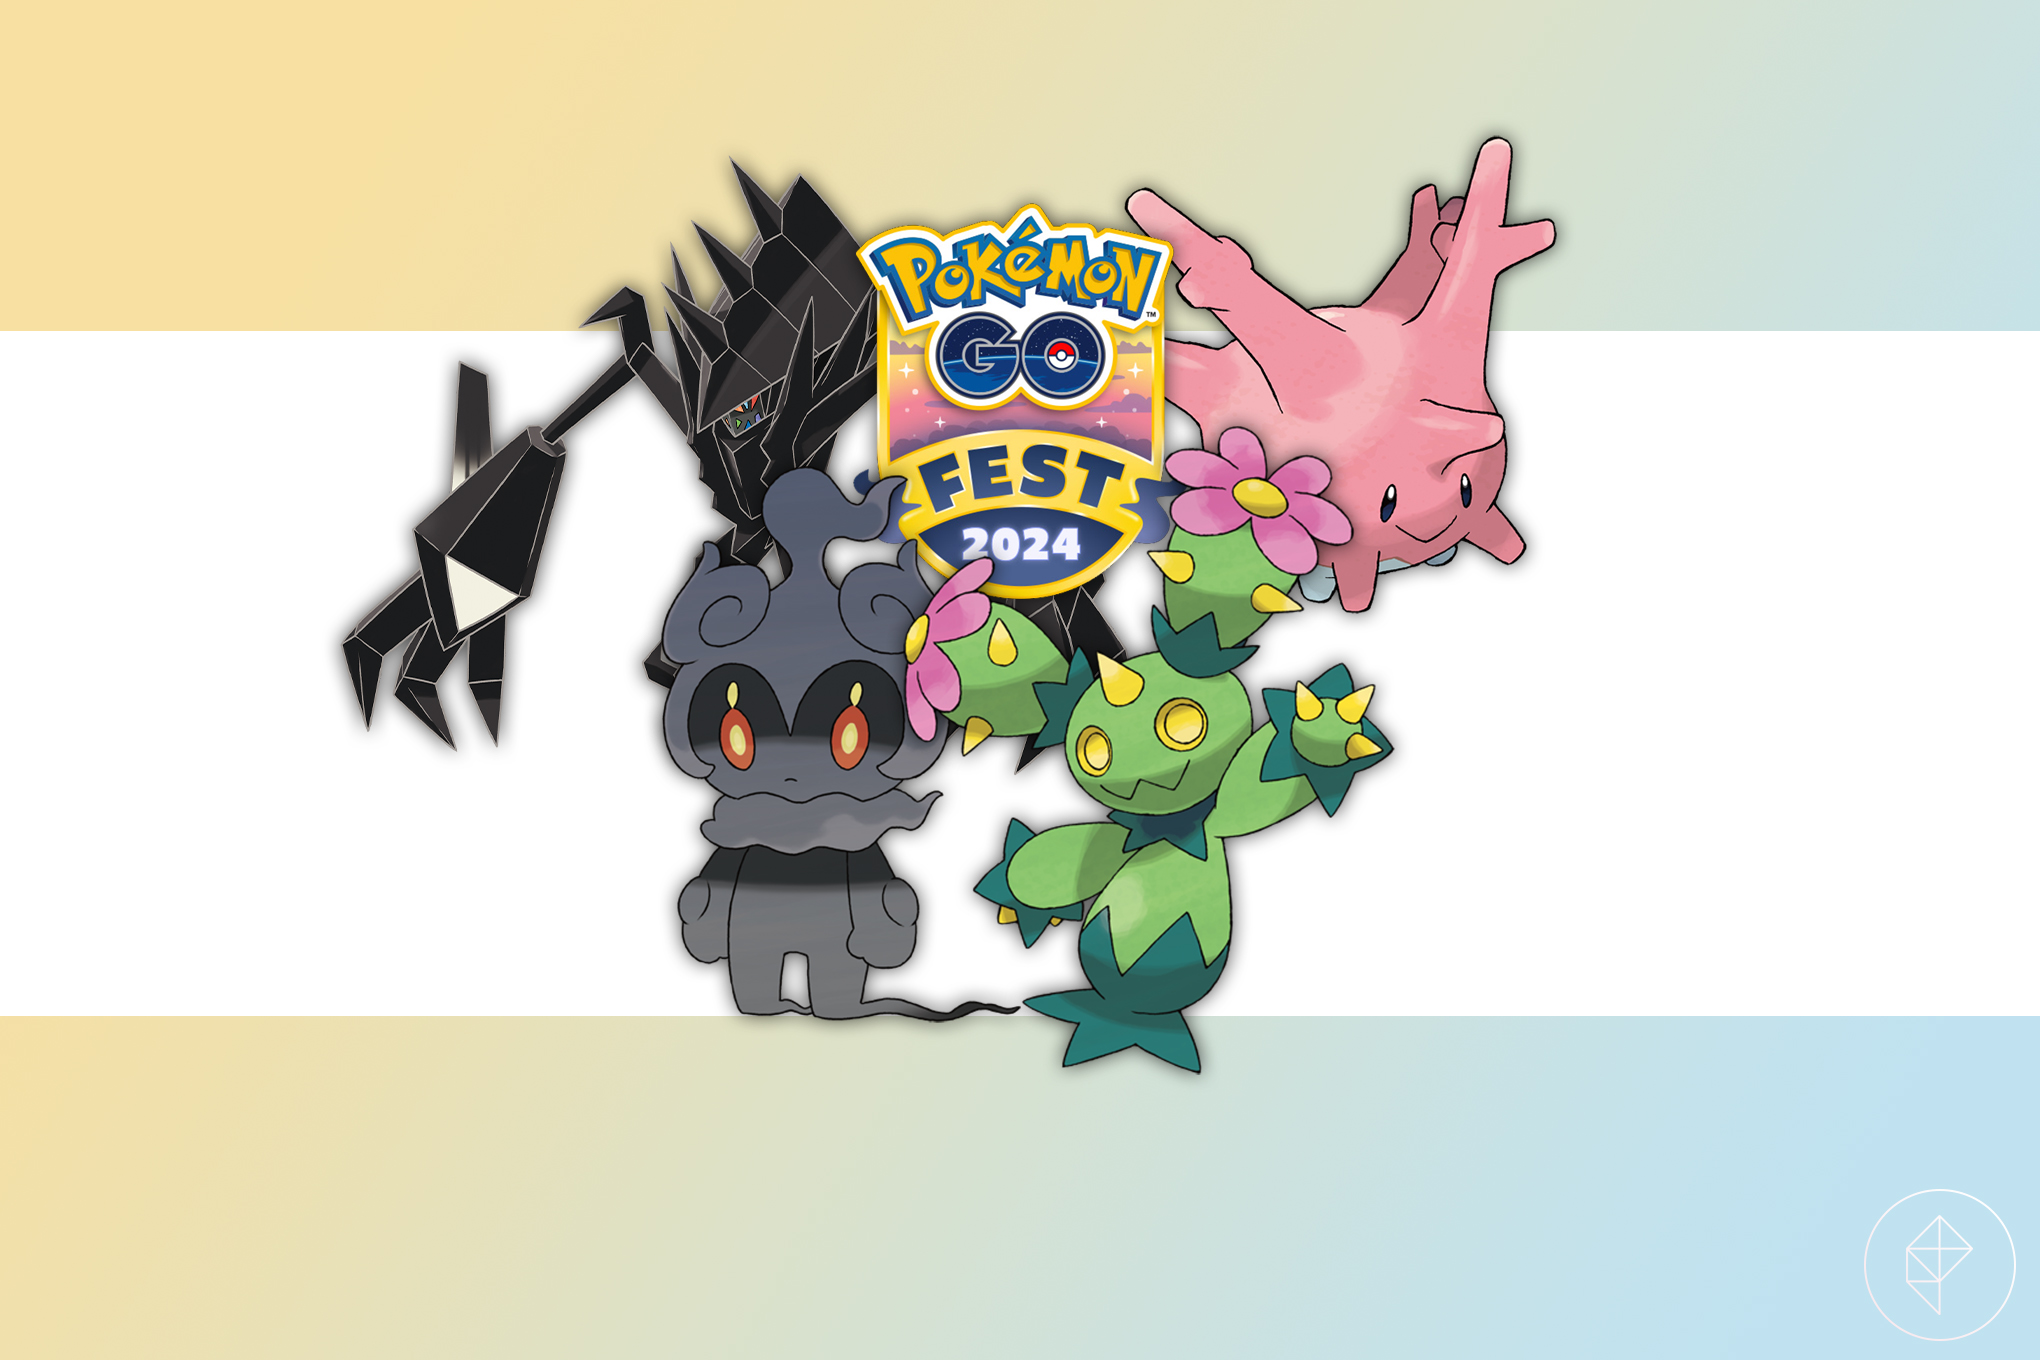 Necrozma, Marshadow, Corsola, and Maractus on a gold and blue gradient background